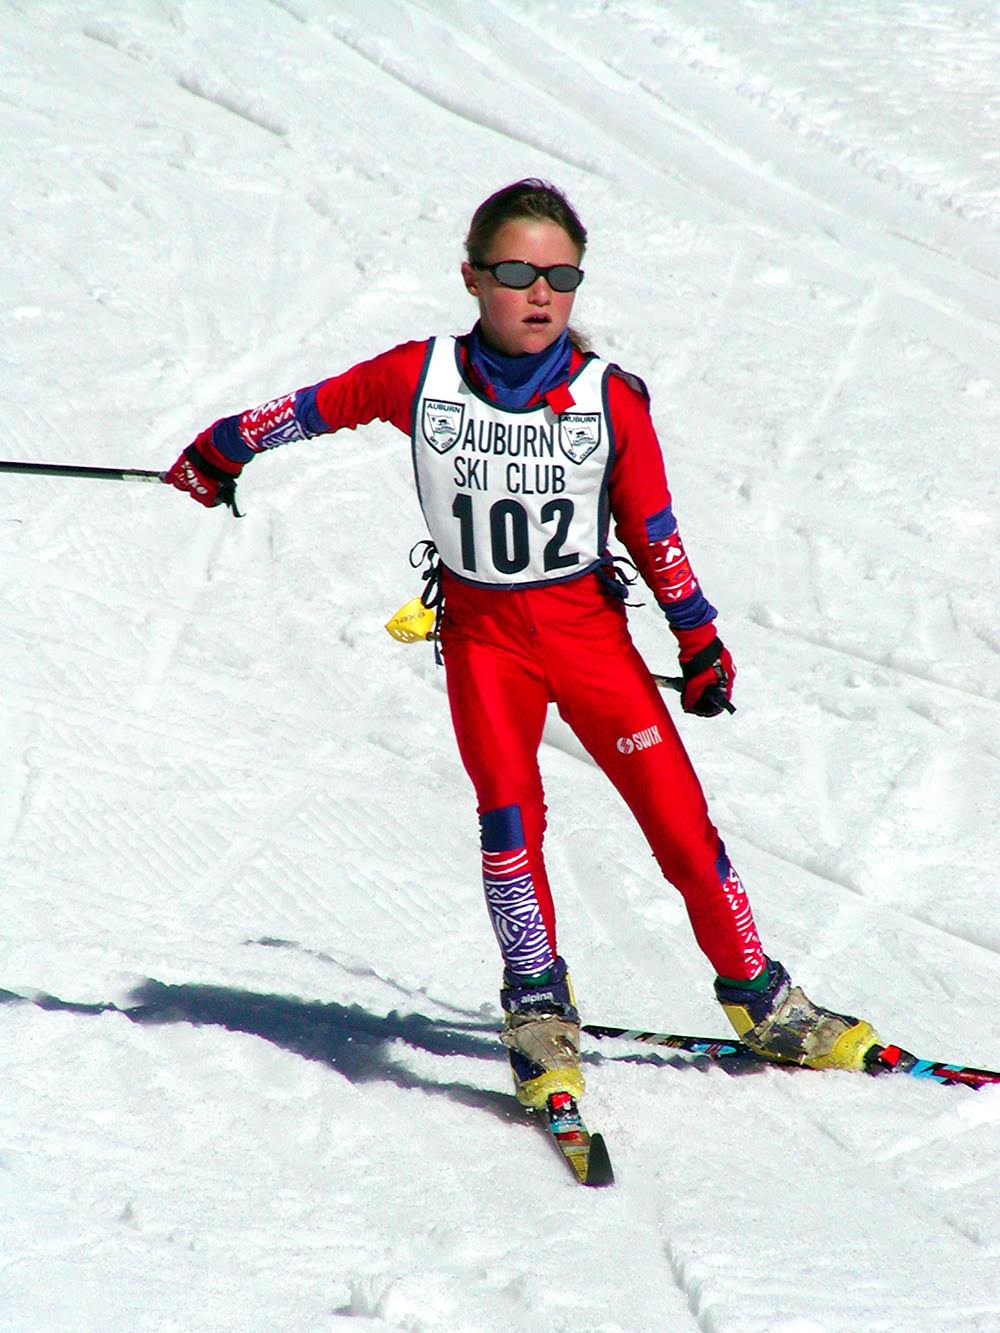 Reid at an Auburn Ski Club race in 2002 - which photographer Mark Nadell reports was even a biathlon race. (Photo: Mark Nadell/MacBeth Graphics)